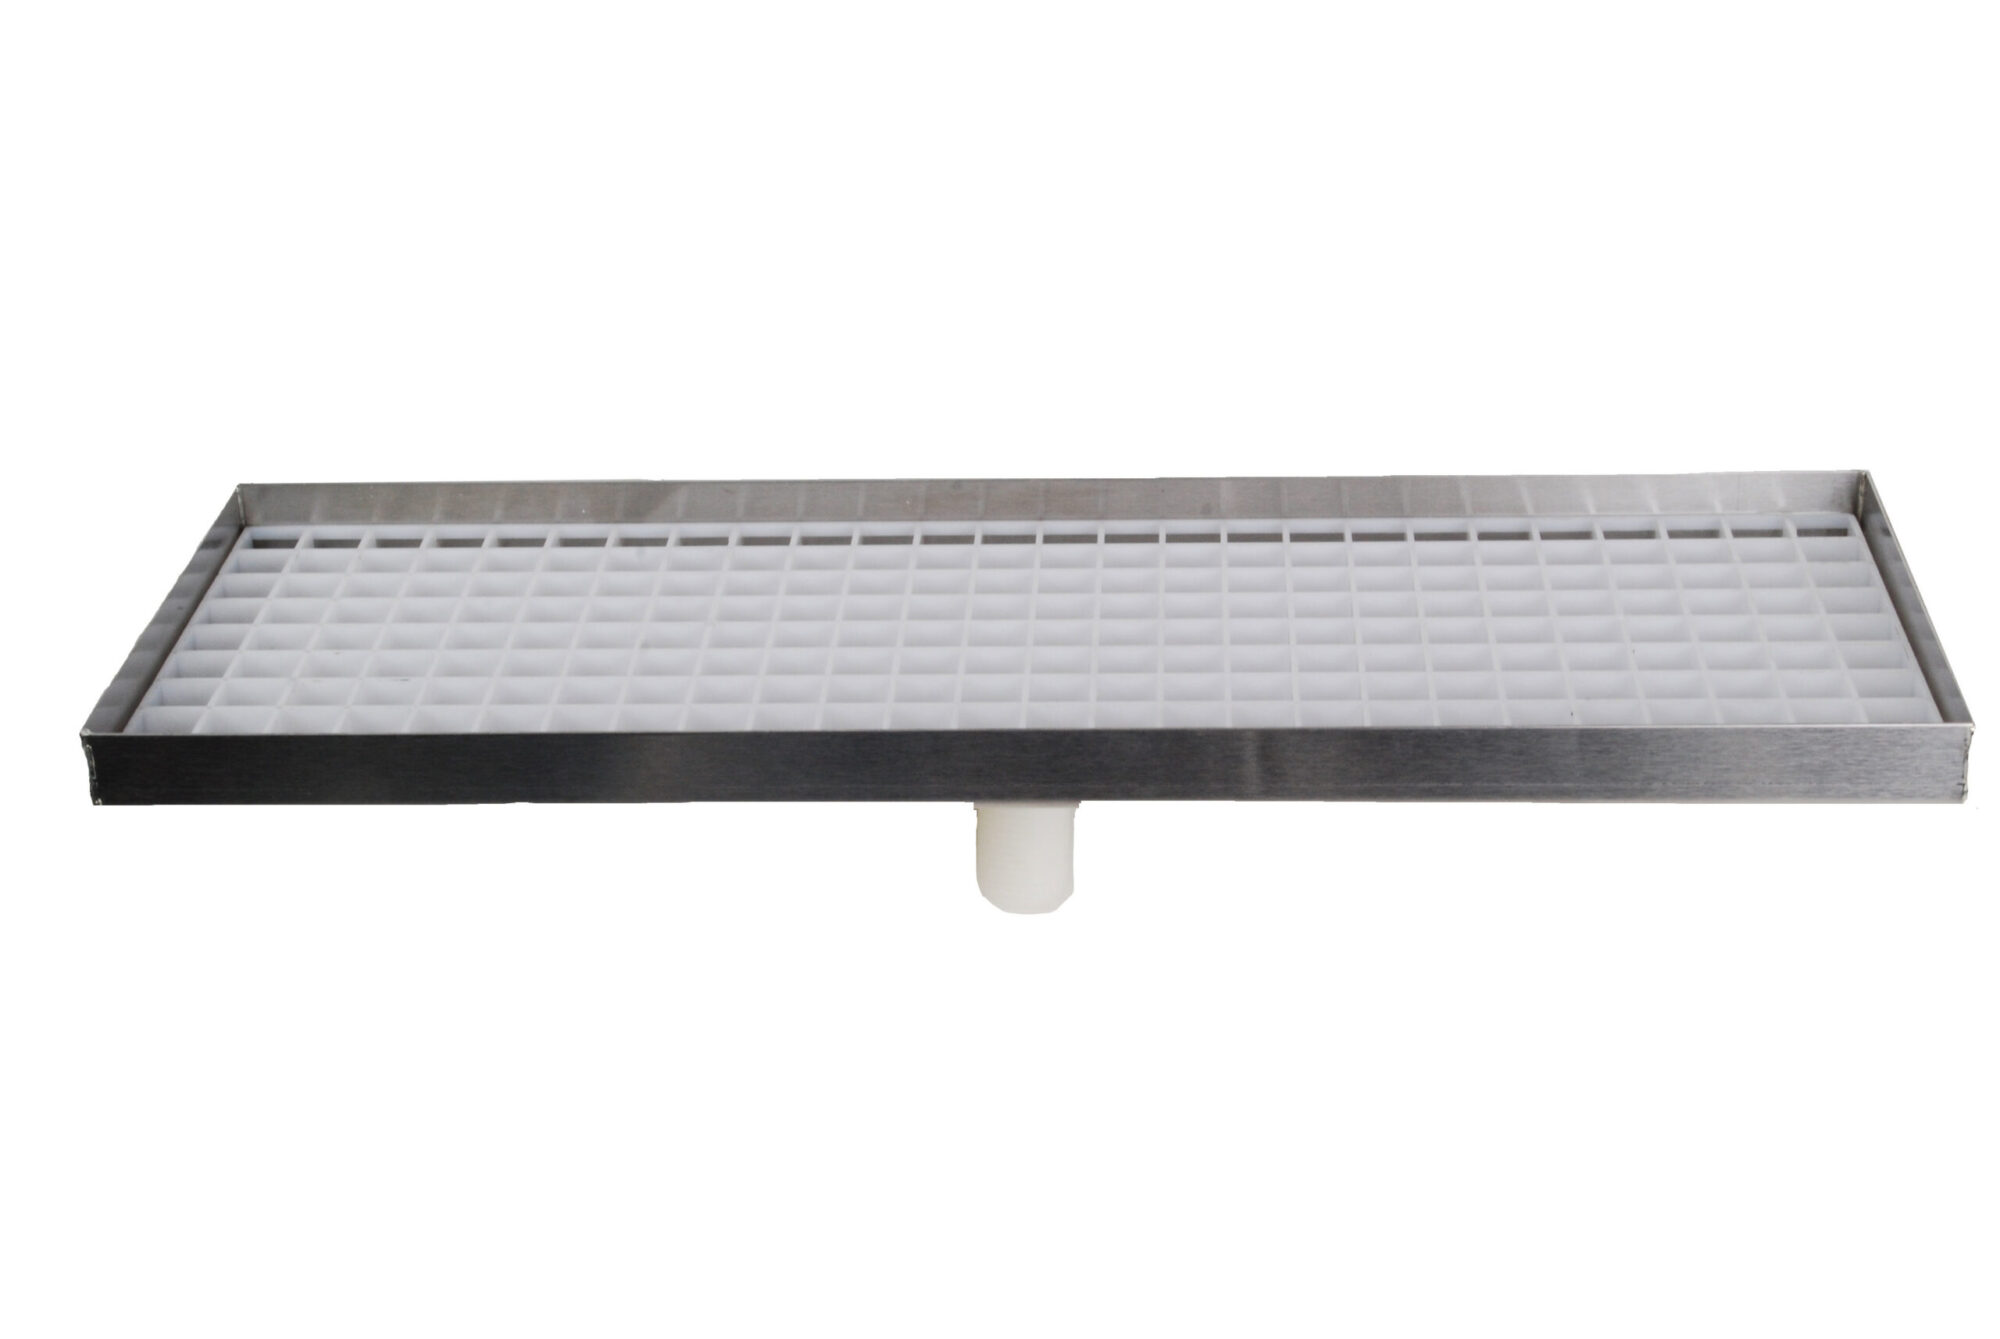 616L-36 Stainless Steel Counter Top Tray with Drain and Plastic Grid- 36"L x 5 3/8"W x 3/4"D